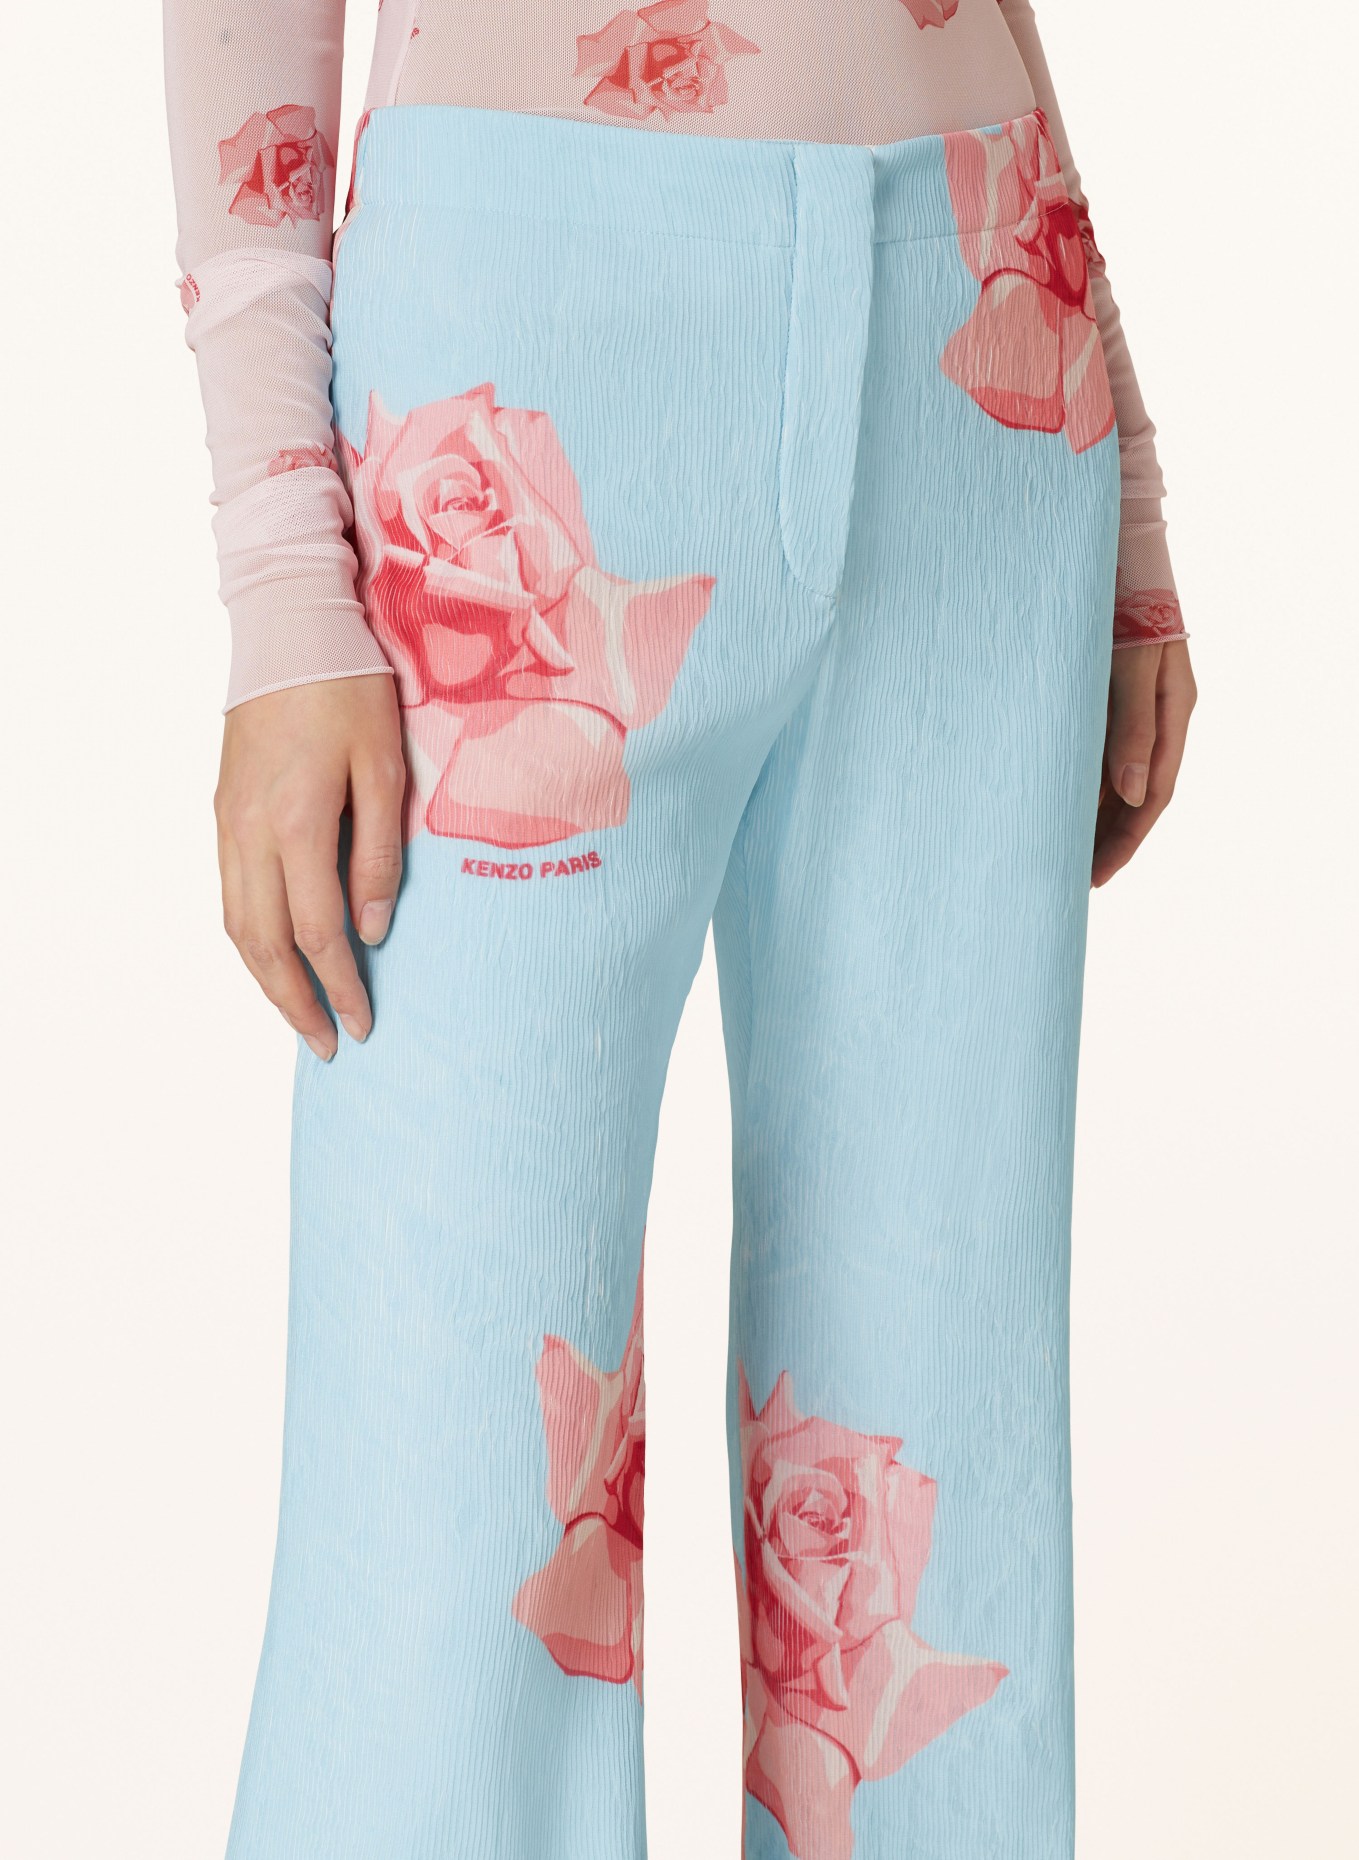 KENZO Pleated pants, Color: LIGHT BLUE/ RED/ NUDE (Image 5)